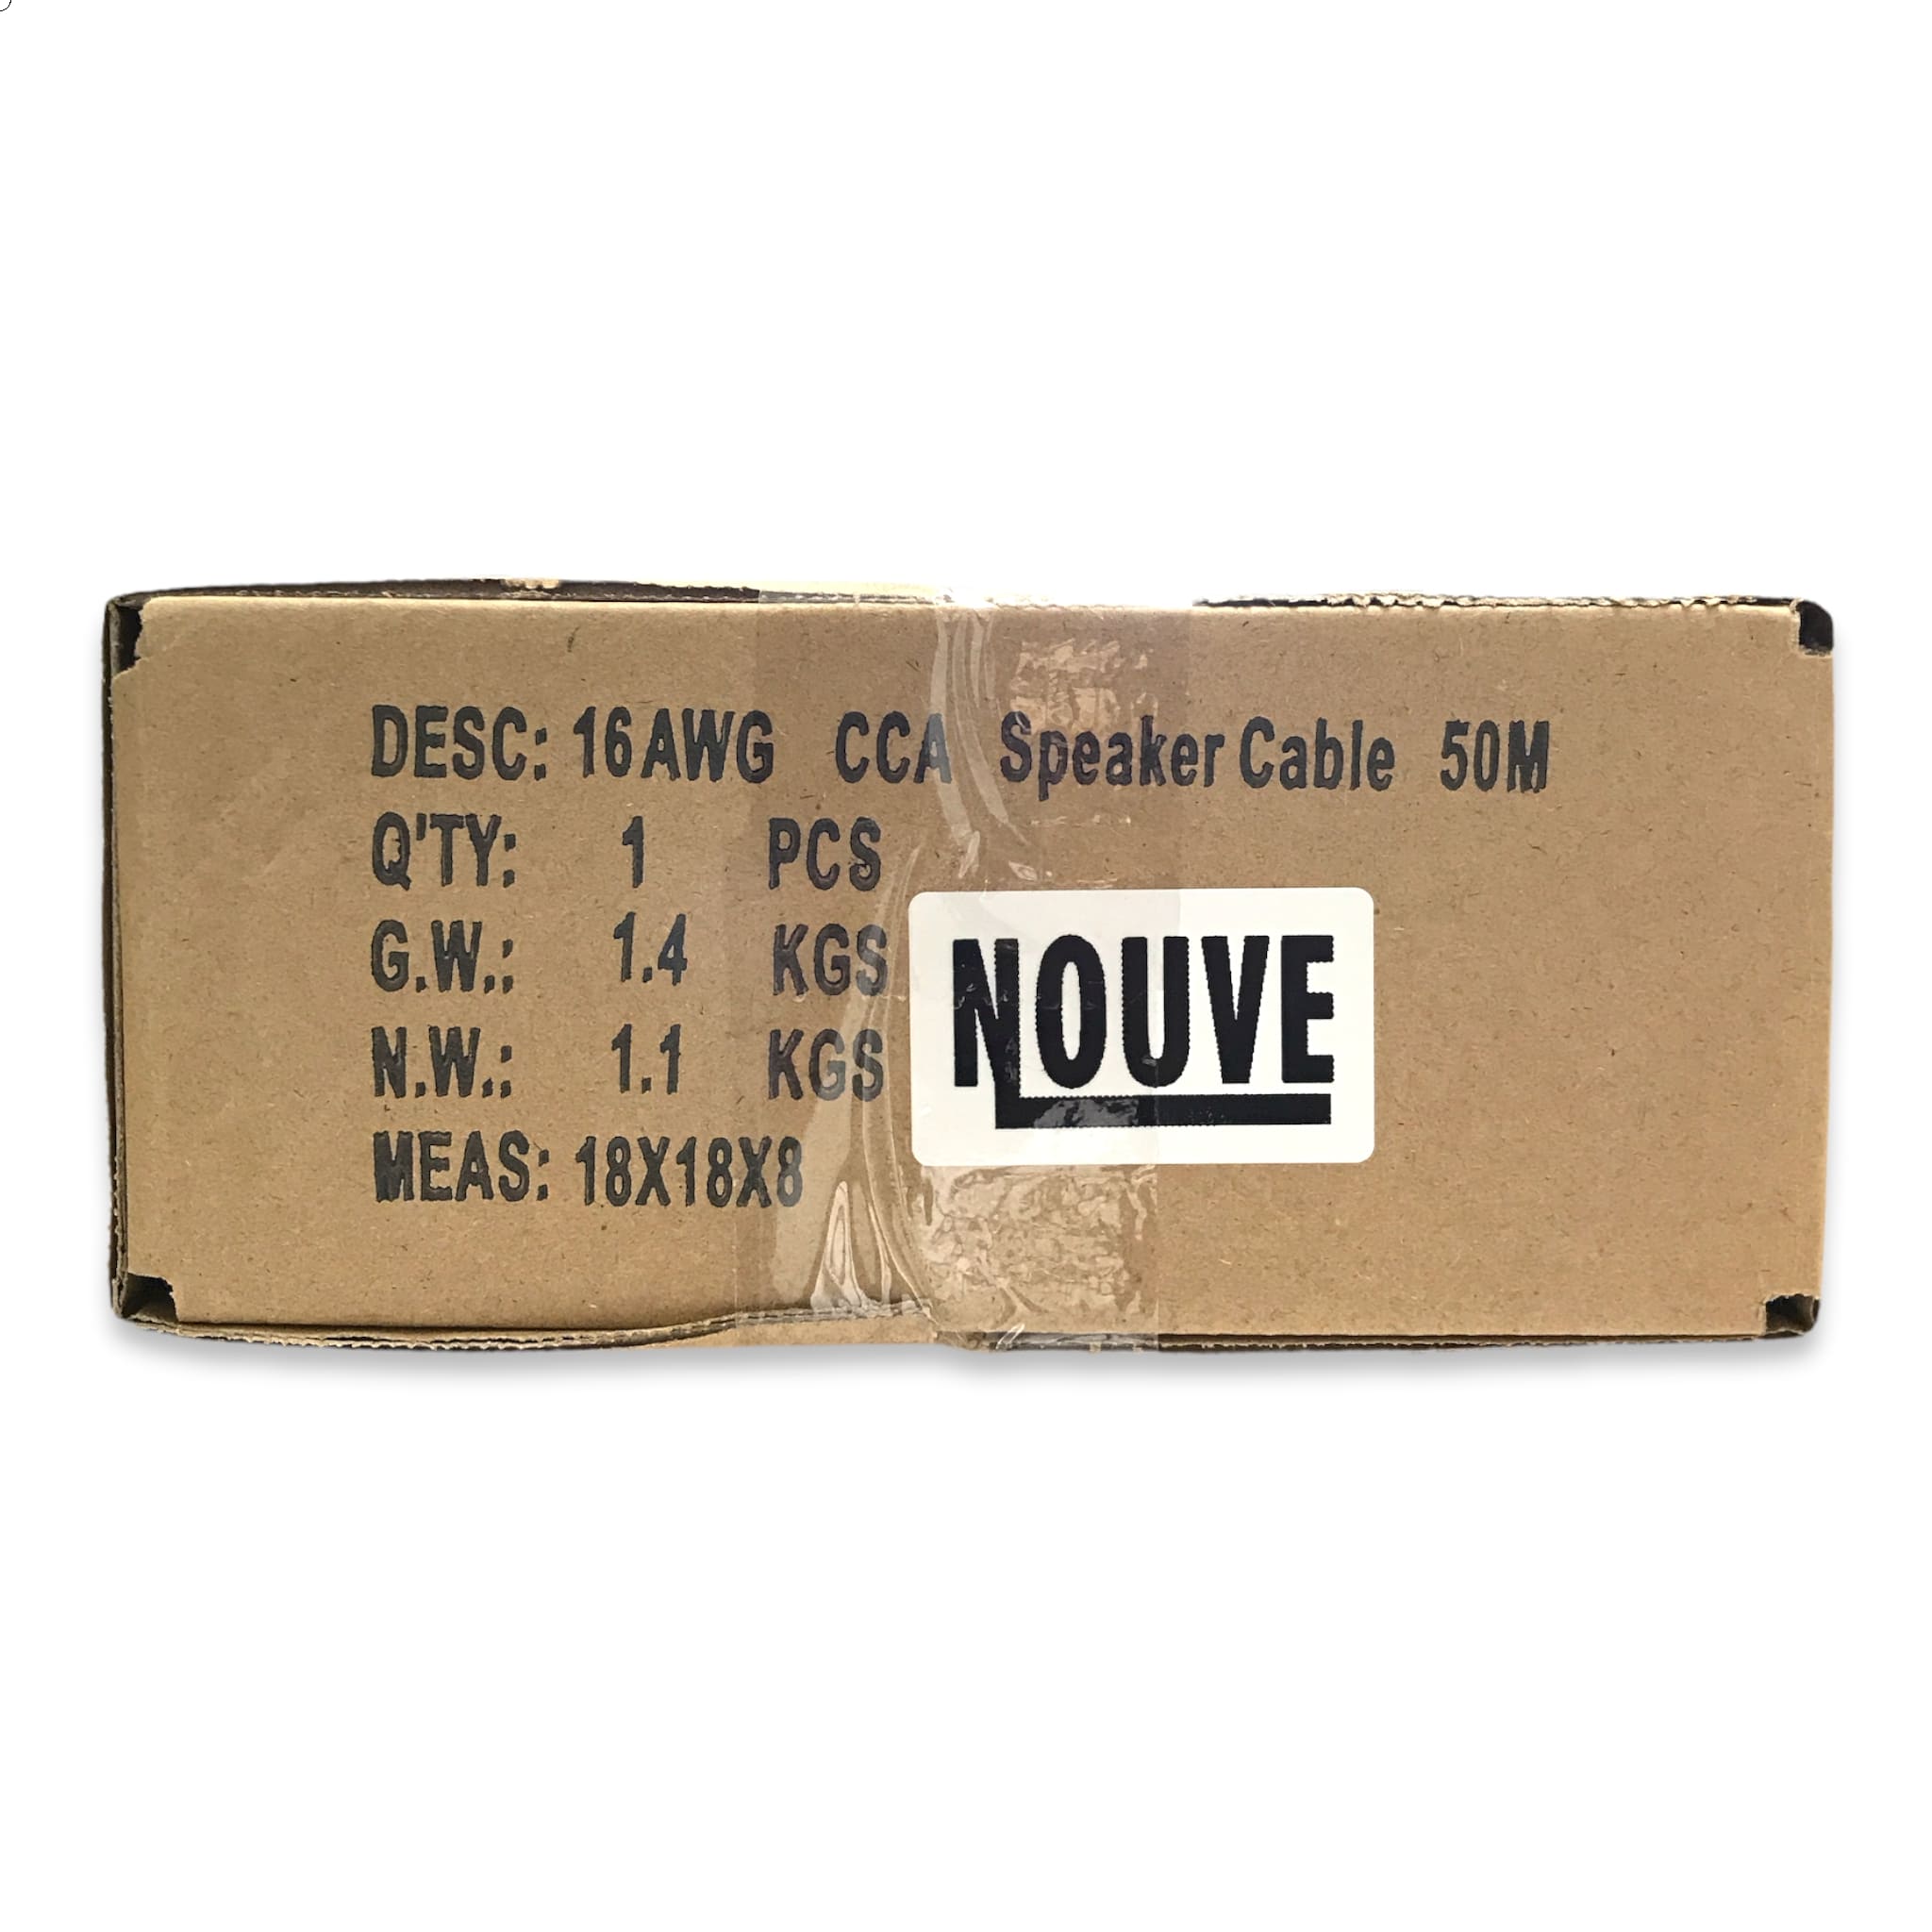 16 awg speaker cable 50m cca nouve box